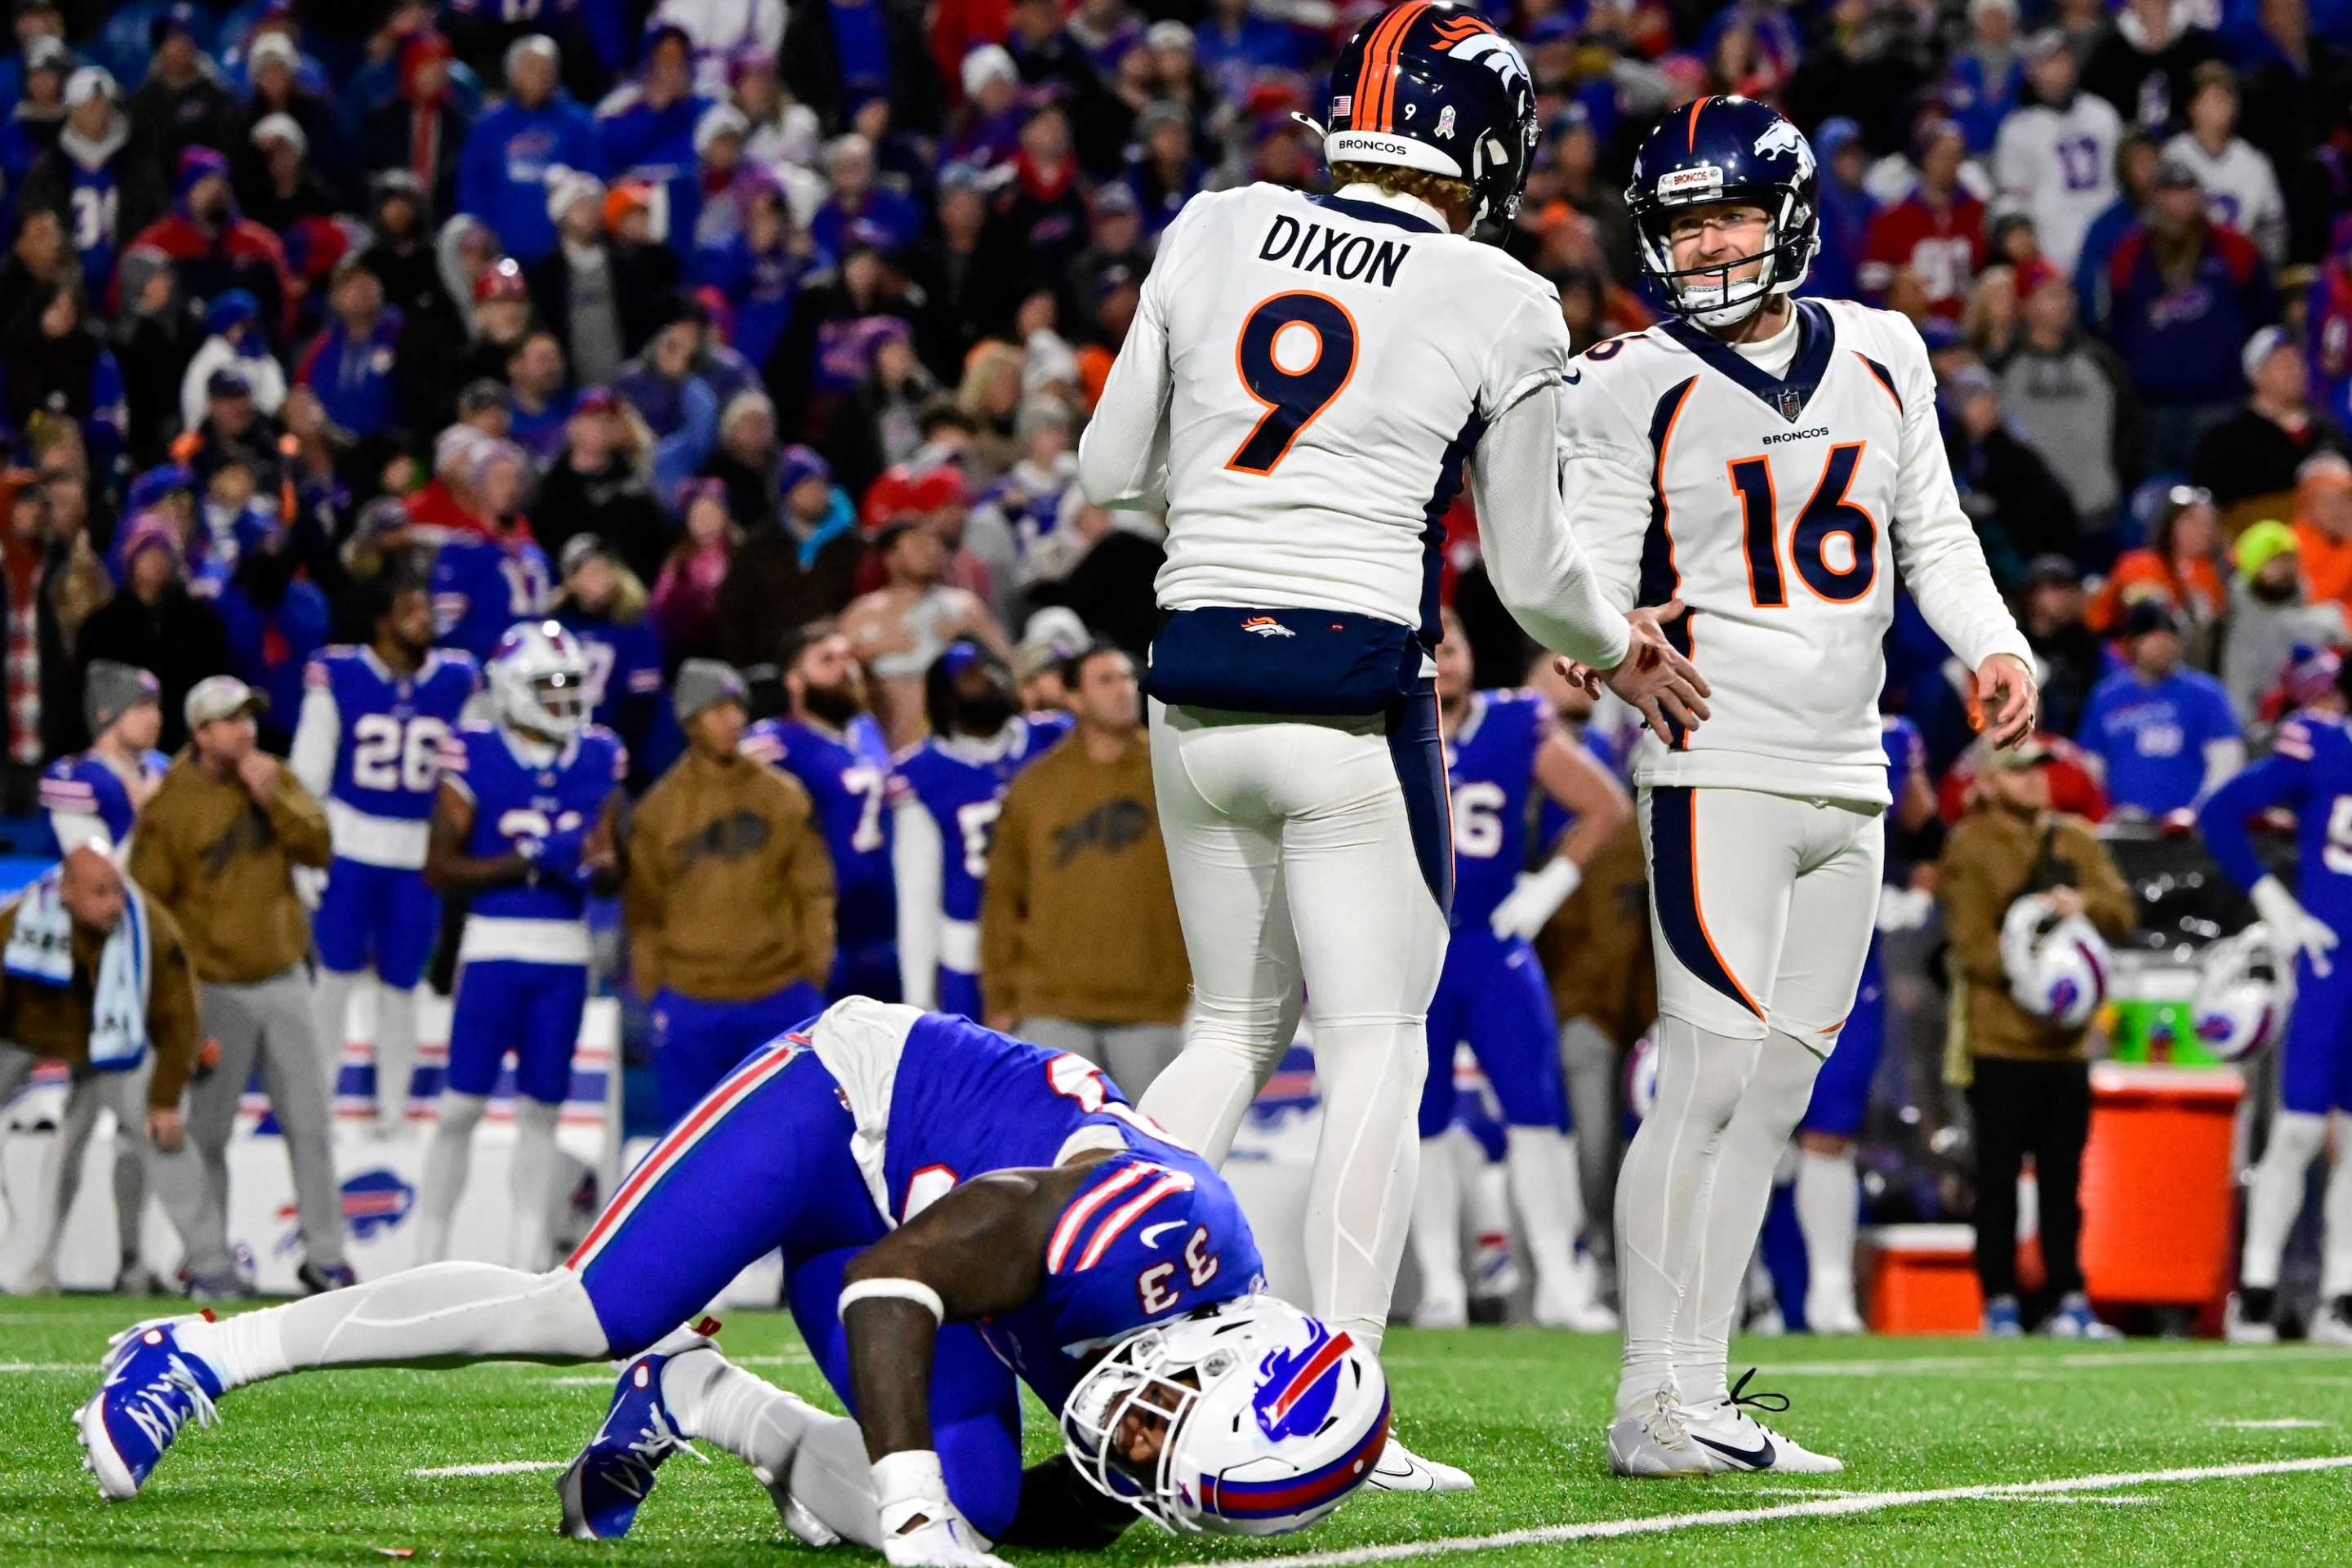 ORCHARD PARK, NY - NOVEMBER 13: Denver Broncos punter Riley Dixon (9) celebrates with place kicker Wil Lutz (16) who kicked the winning field goal against the Buffalo Bills in the fourth quarter at Highmark Stadium November 13, 2023. Buffalo Bills cornerback Siran Neal (33) moments after the kick, The Broncos won 24-22. (Photo by Andy Cross/The Denver Post)